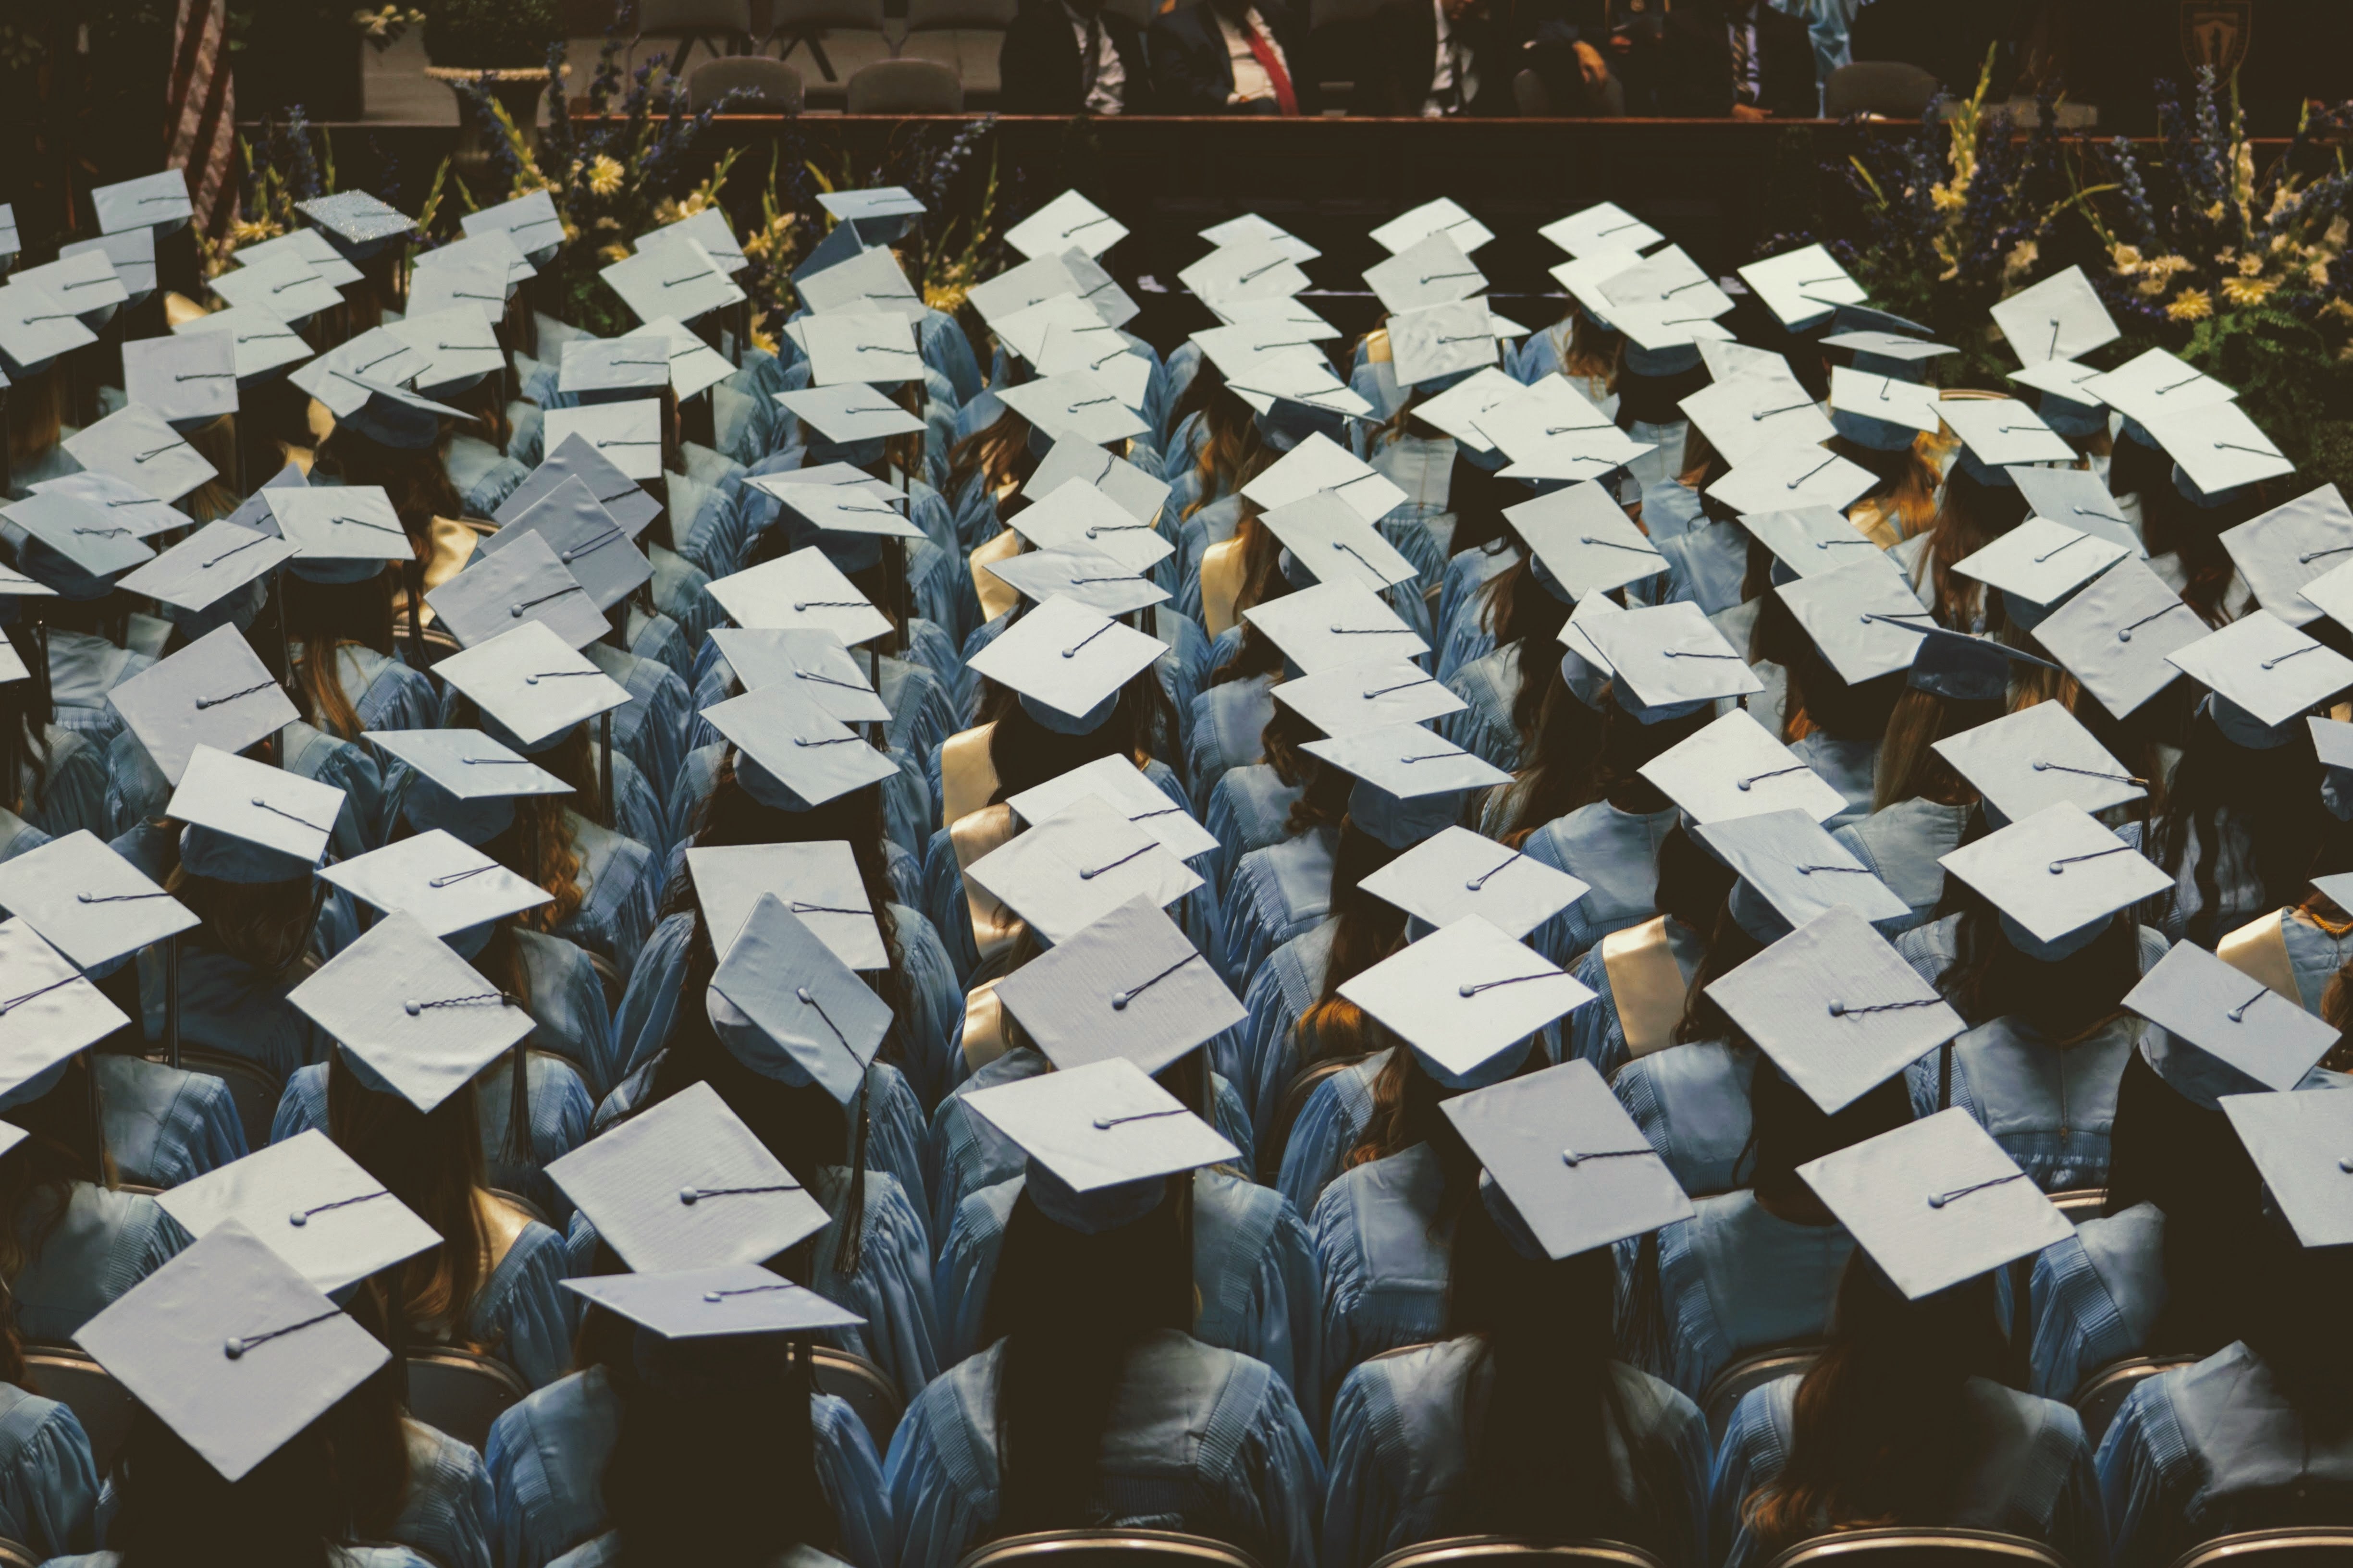 aerial view of students wearing graduation caps